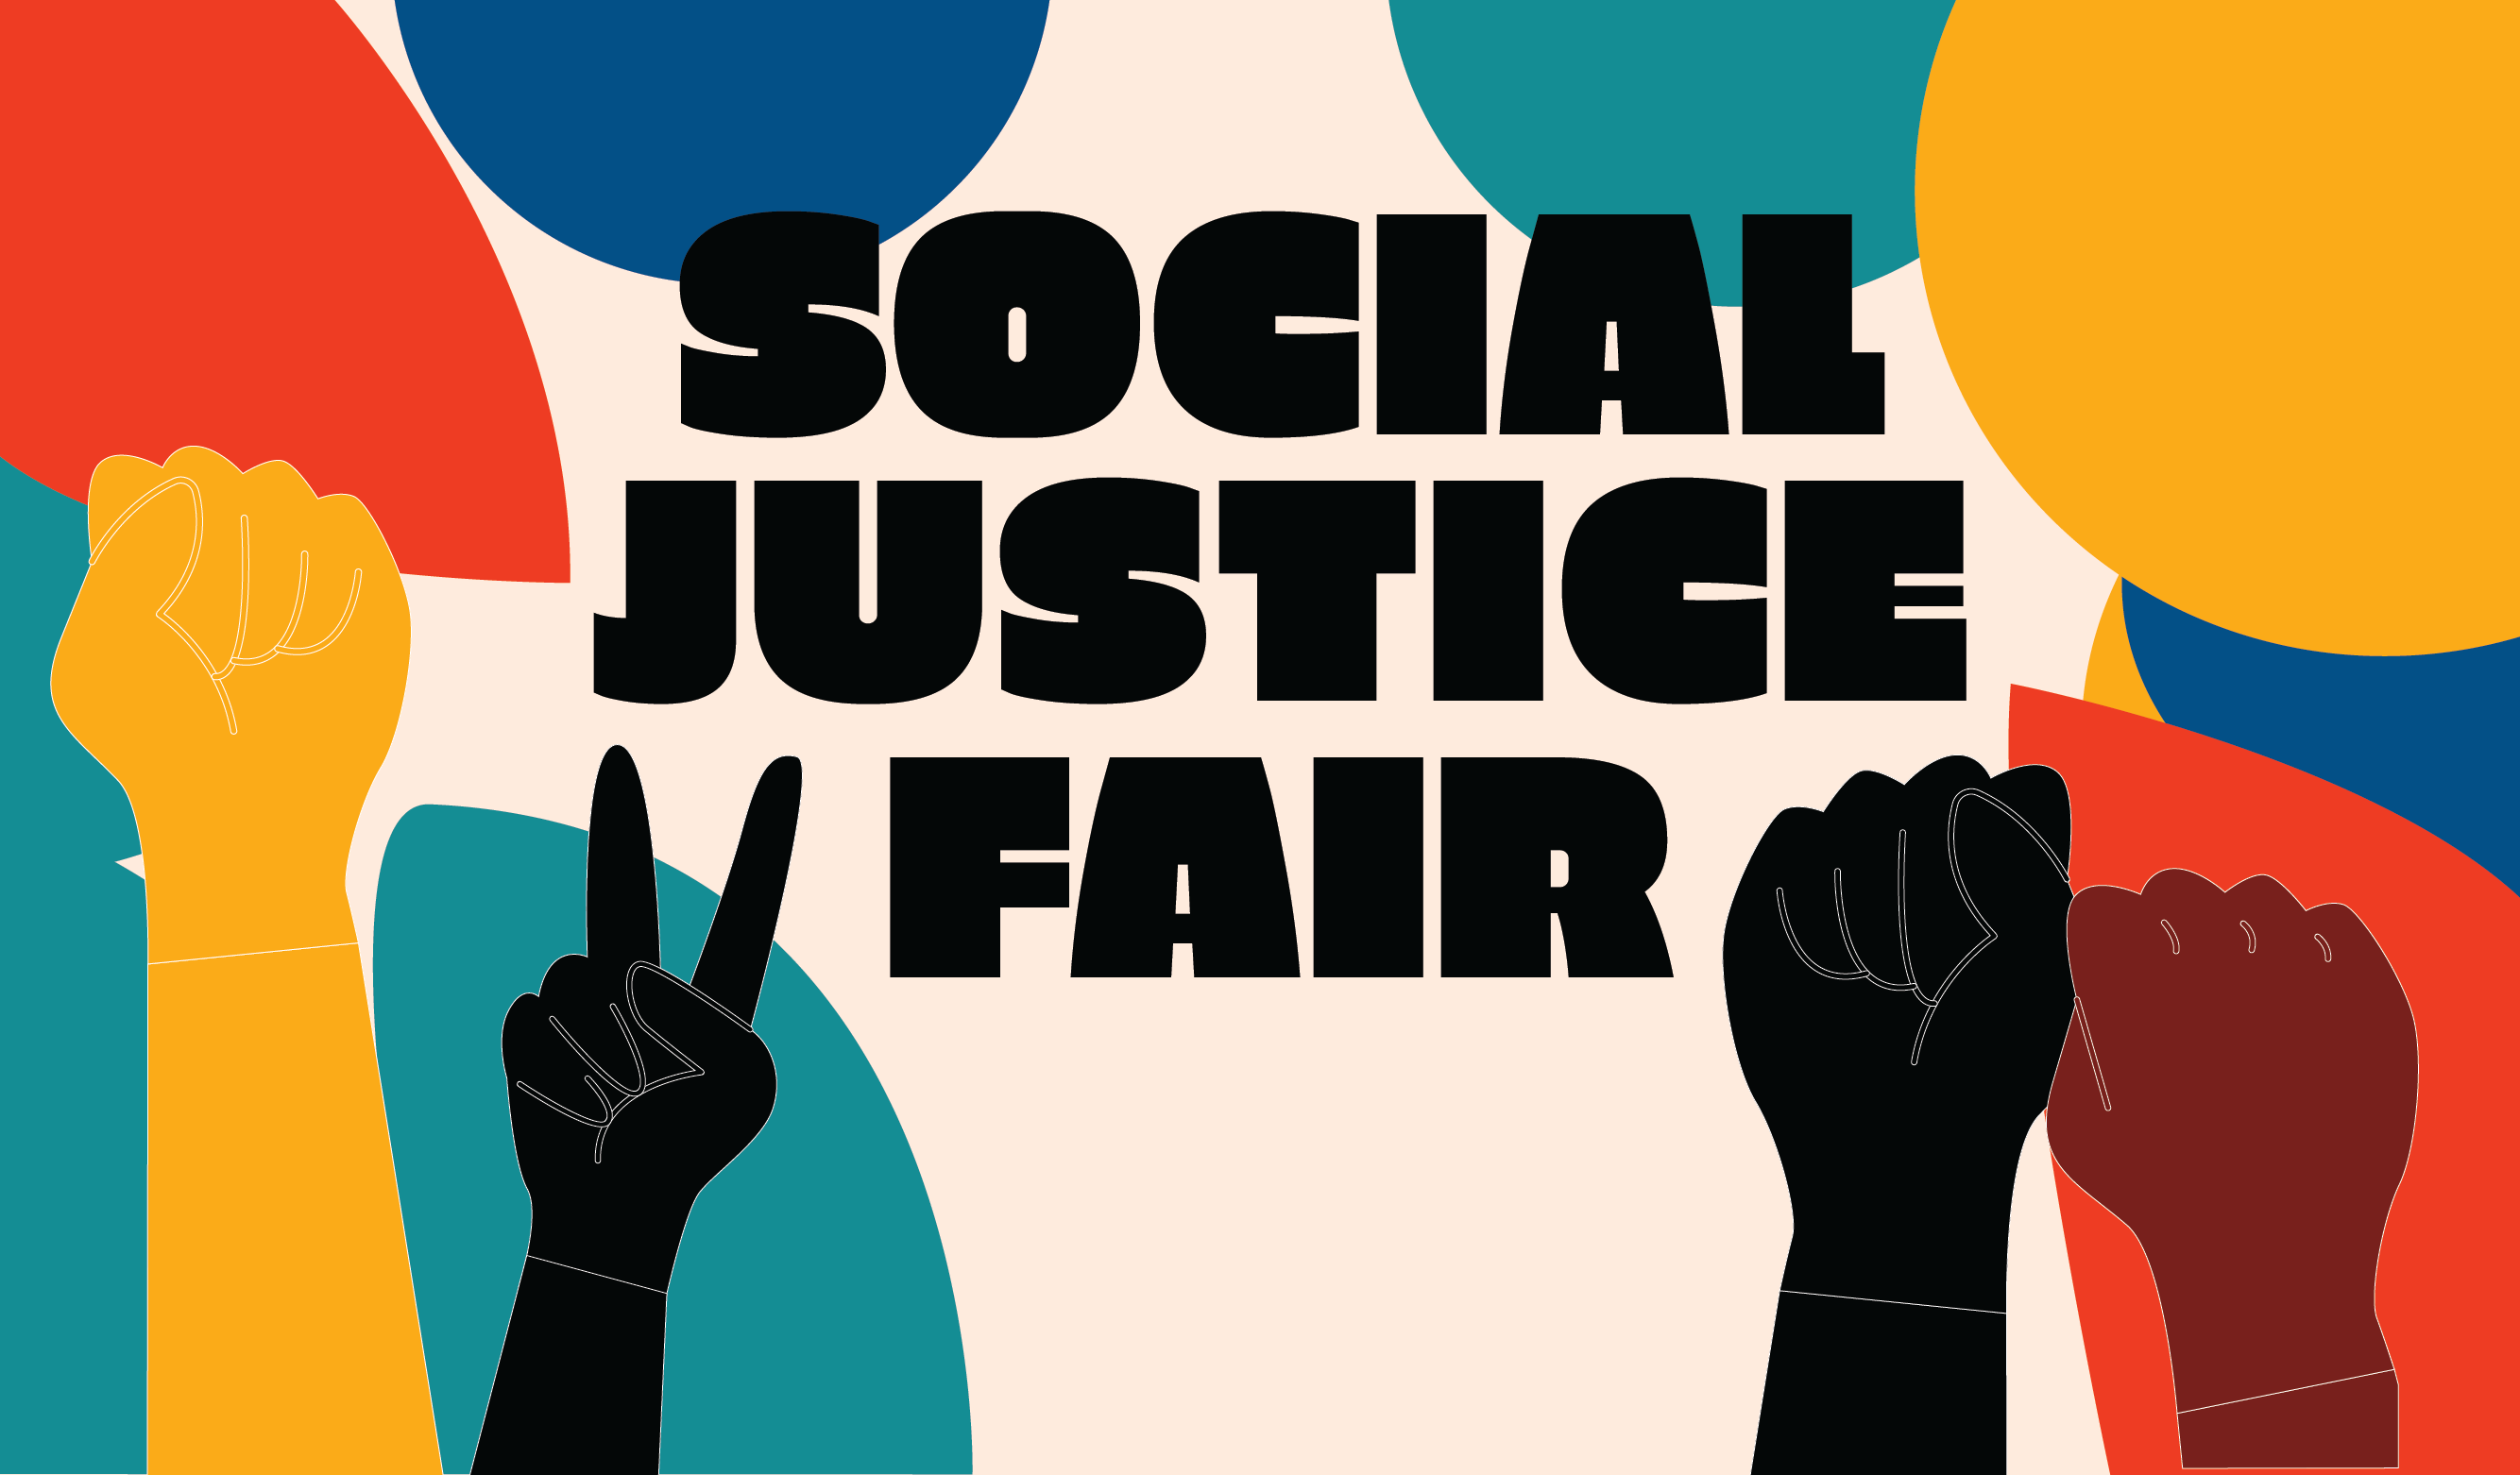 Graphic with hands in fists and peace sign with "social justice fair" text